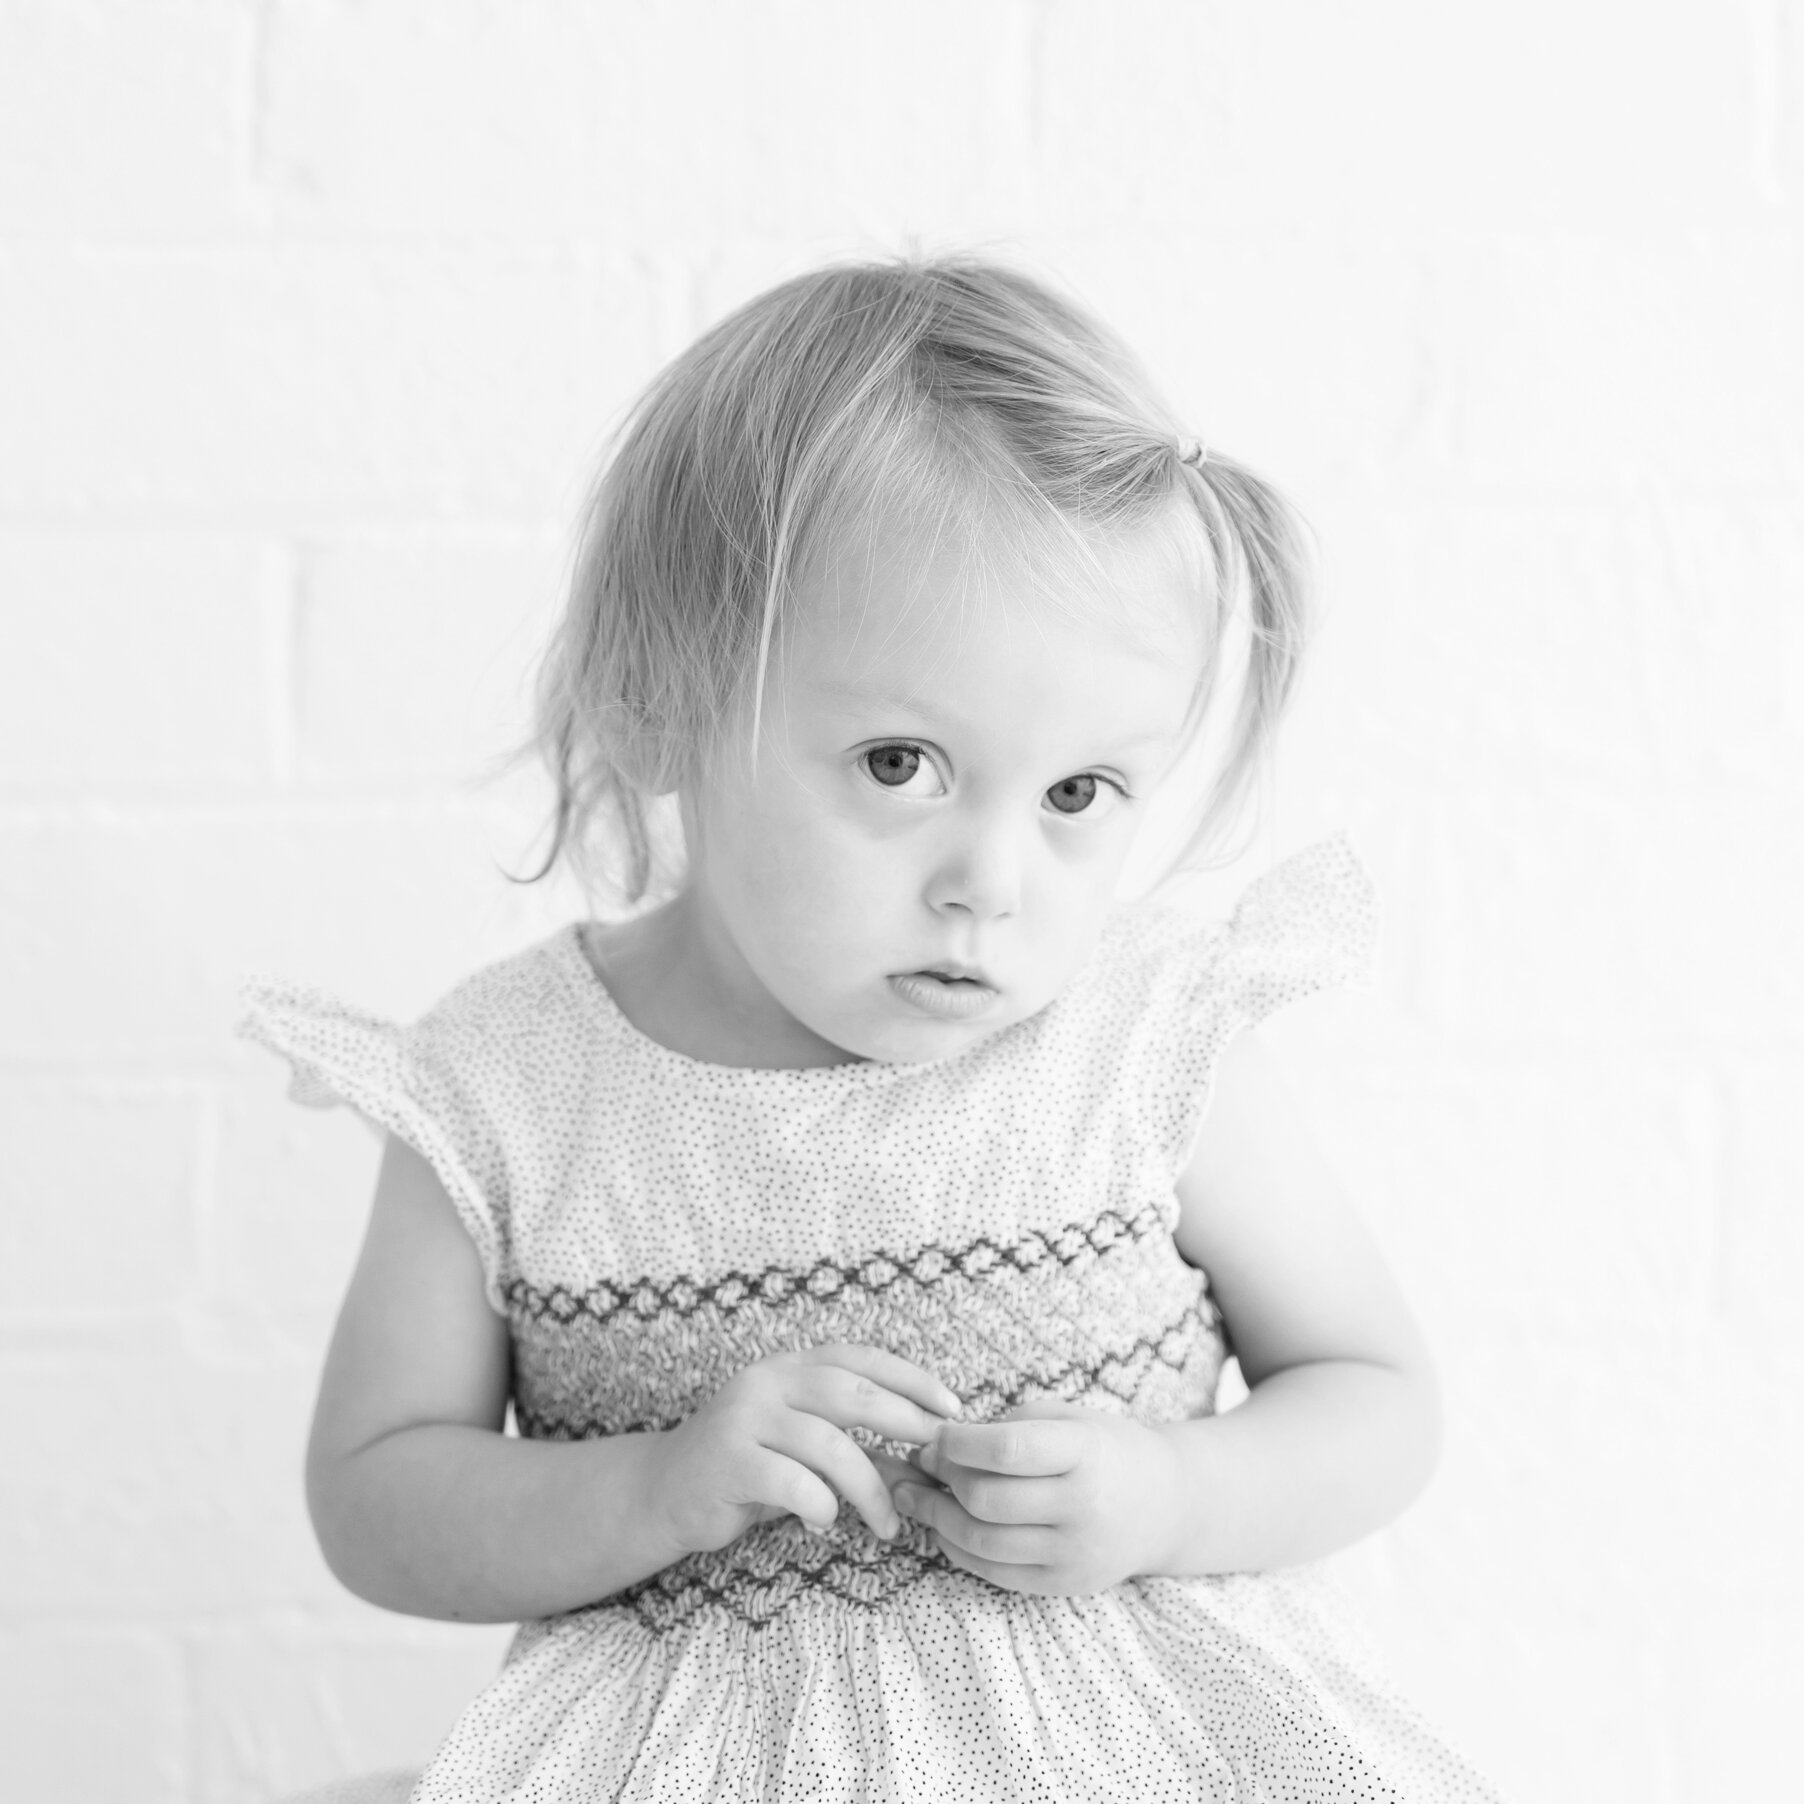 Some of my favourite clients are the sweetest shy little people...and then they warm up and it gets hectic!

#childphotographymelbourne #familyphotographymelbourne #photography #melbournechildphotographer #photographer #melbournefamilyphotographer #n